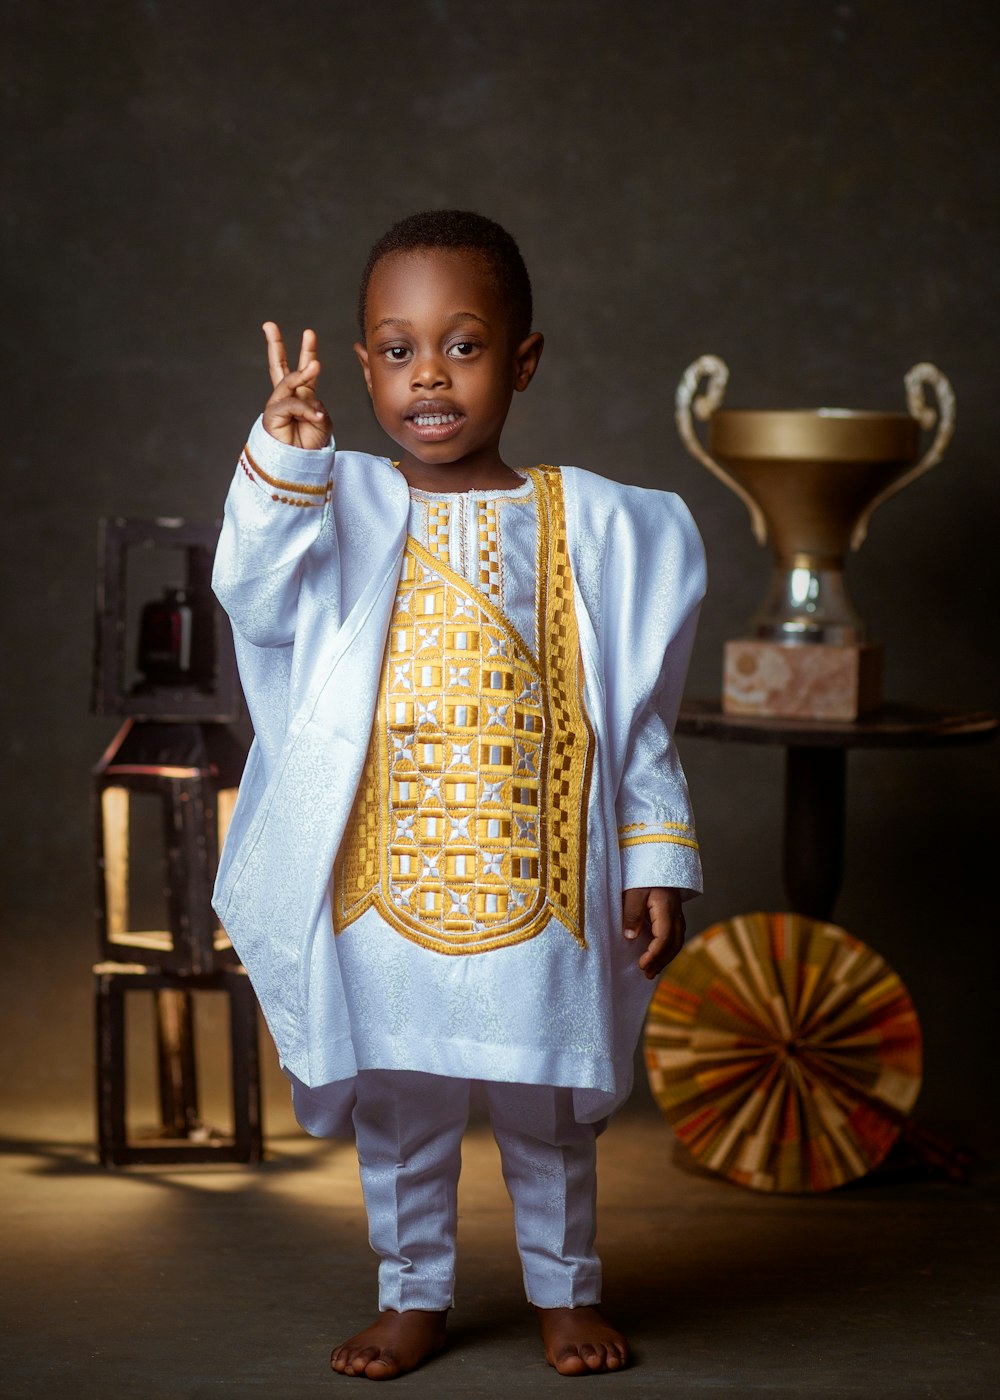 a young boy dressed in a white and gold outfit